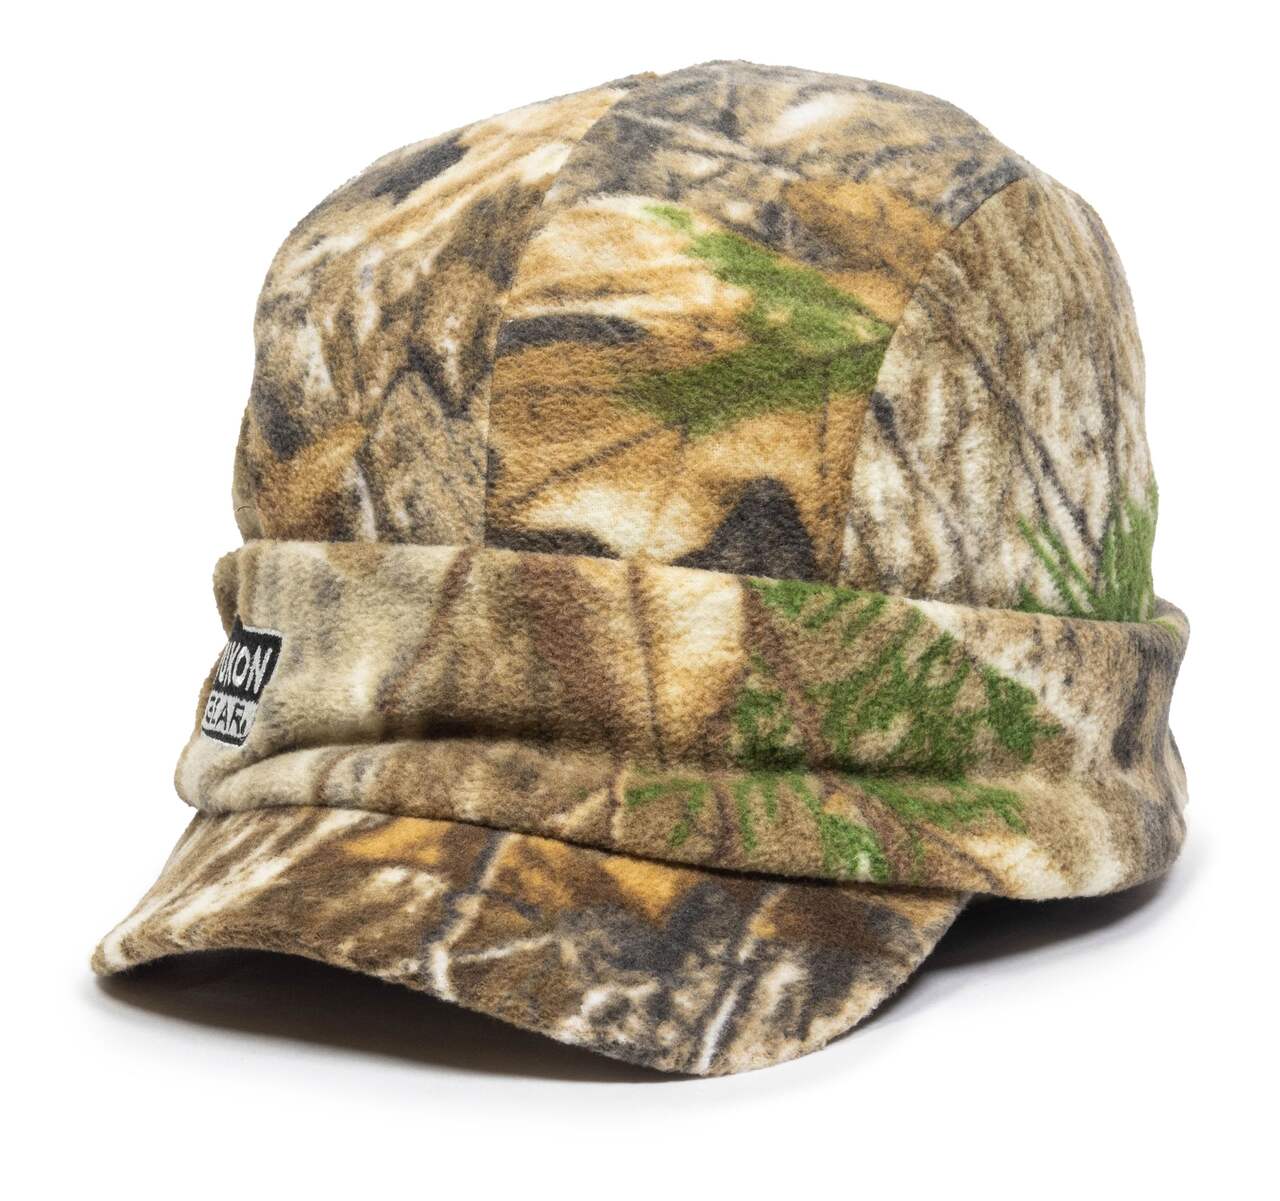 https://media-www.canadiantire.ca/product/playing/hunting/hunting-apparel-footwear/3750196/yukon-gear-peaked-toque-realtree-xtra-23e662b6-46d9-47cf-a46a-67dc0b284927-jpgrendition.jpg?imdensity=1&imwidth=640&impolicy=mZoom